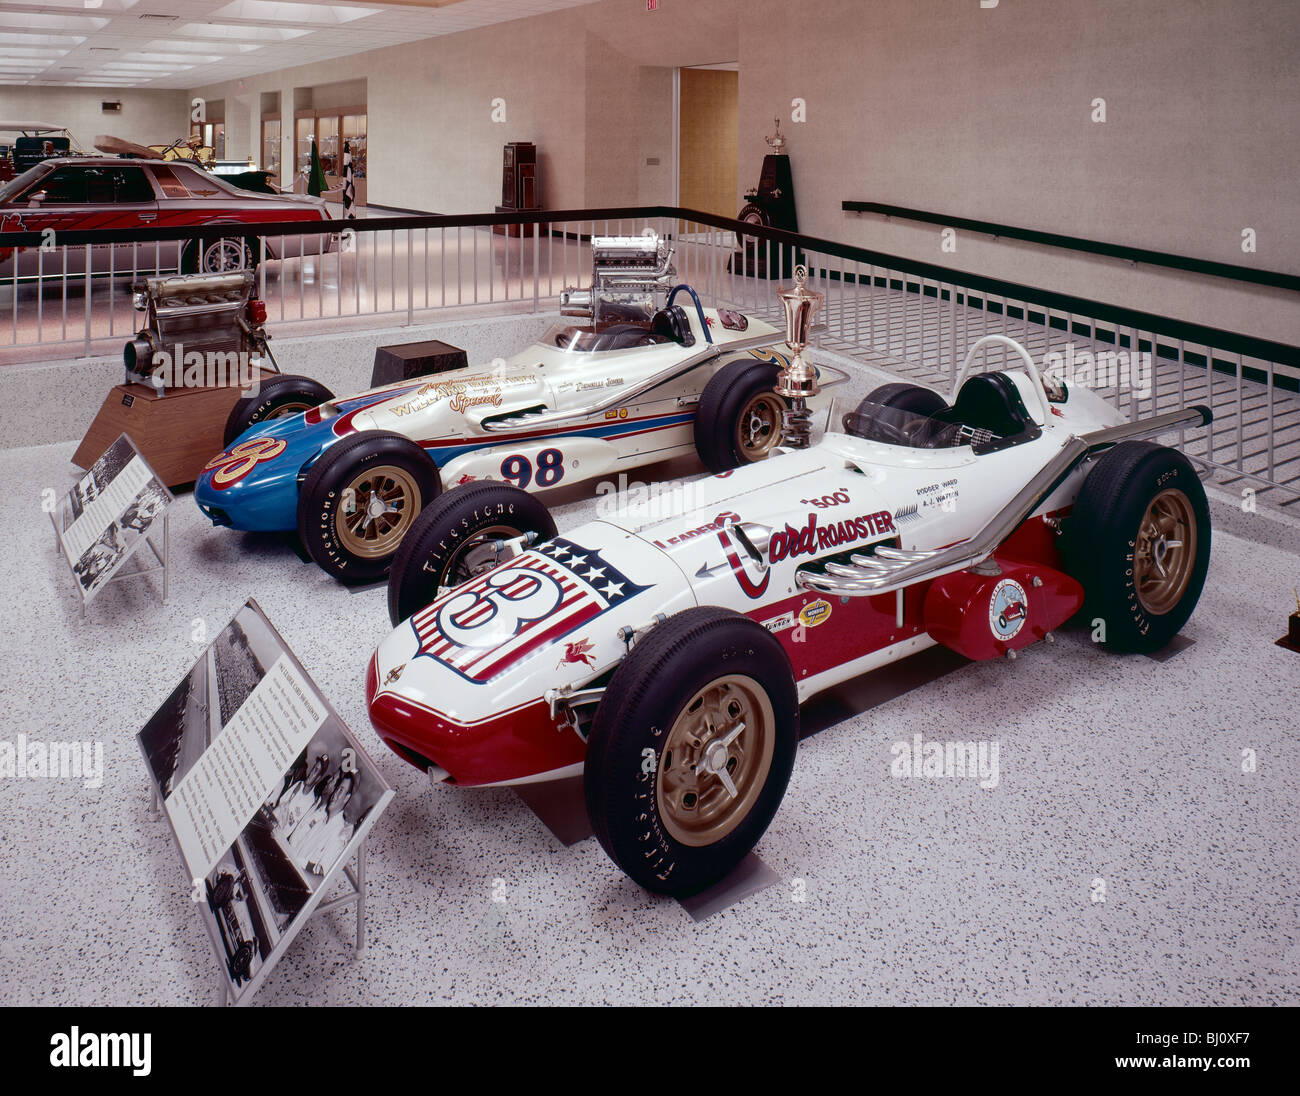 Vintage racing cars sul display al Motor Speedway di Indianapolis e Hall of Fame Museum, Indianapolis, Indiana, STATI UNITI D'AMERICA Foto Stock